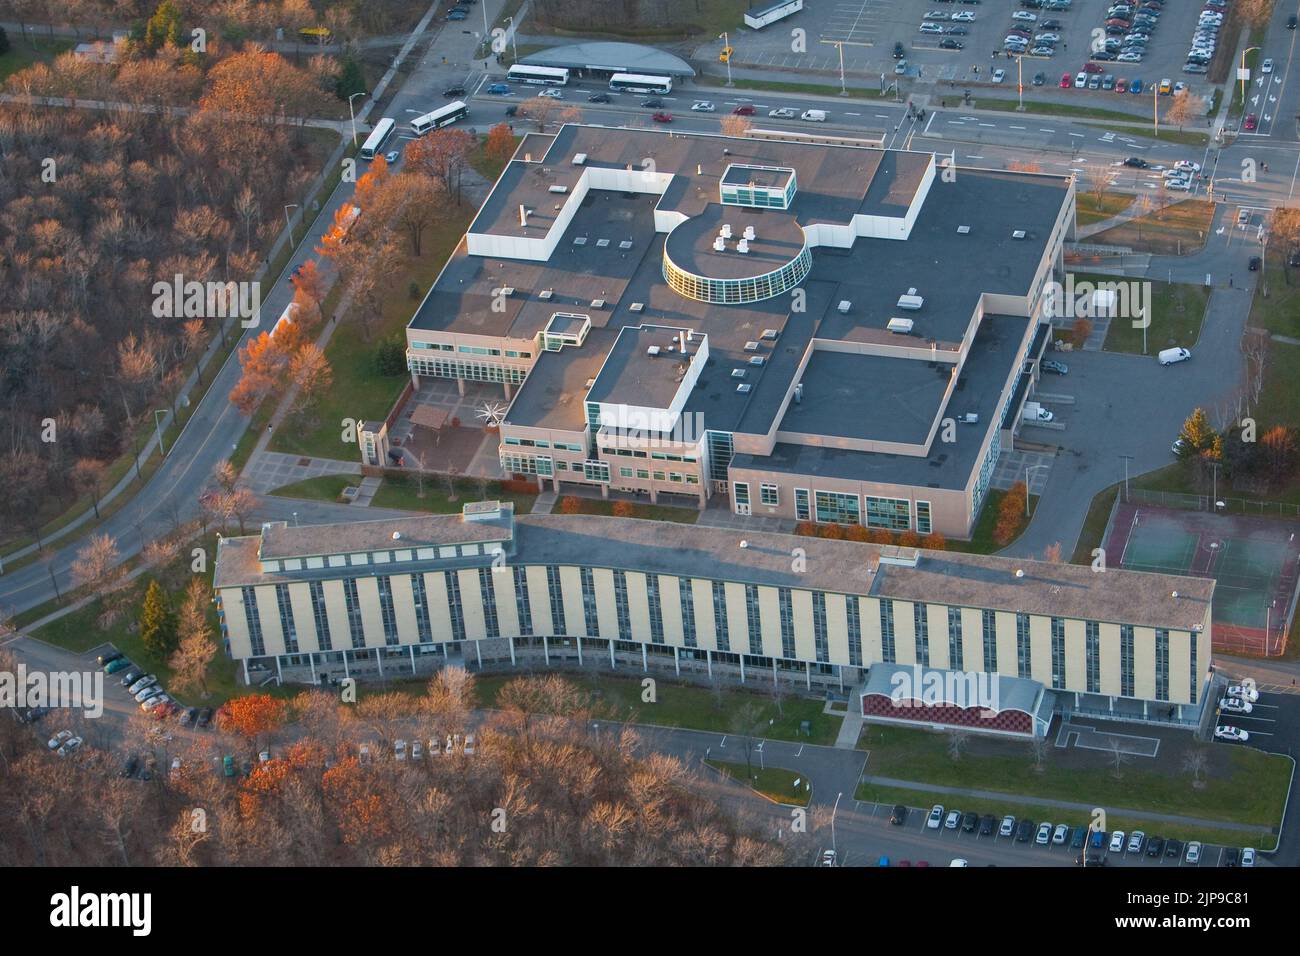 The Pavillon Desjardin (top) and a student residence of the Universite Laval university in Quebec city is pictured in this aerial photo November 11, 2009. Universite Laval is the oldest centre of education in Canada, and was the first institution in North America to offer higher education in French. Stock Photo